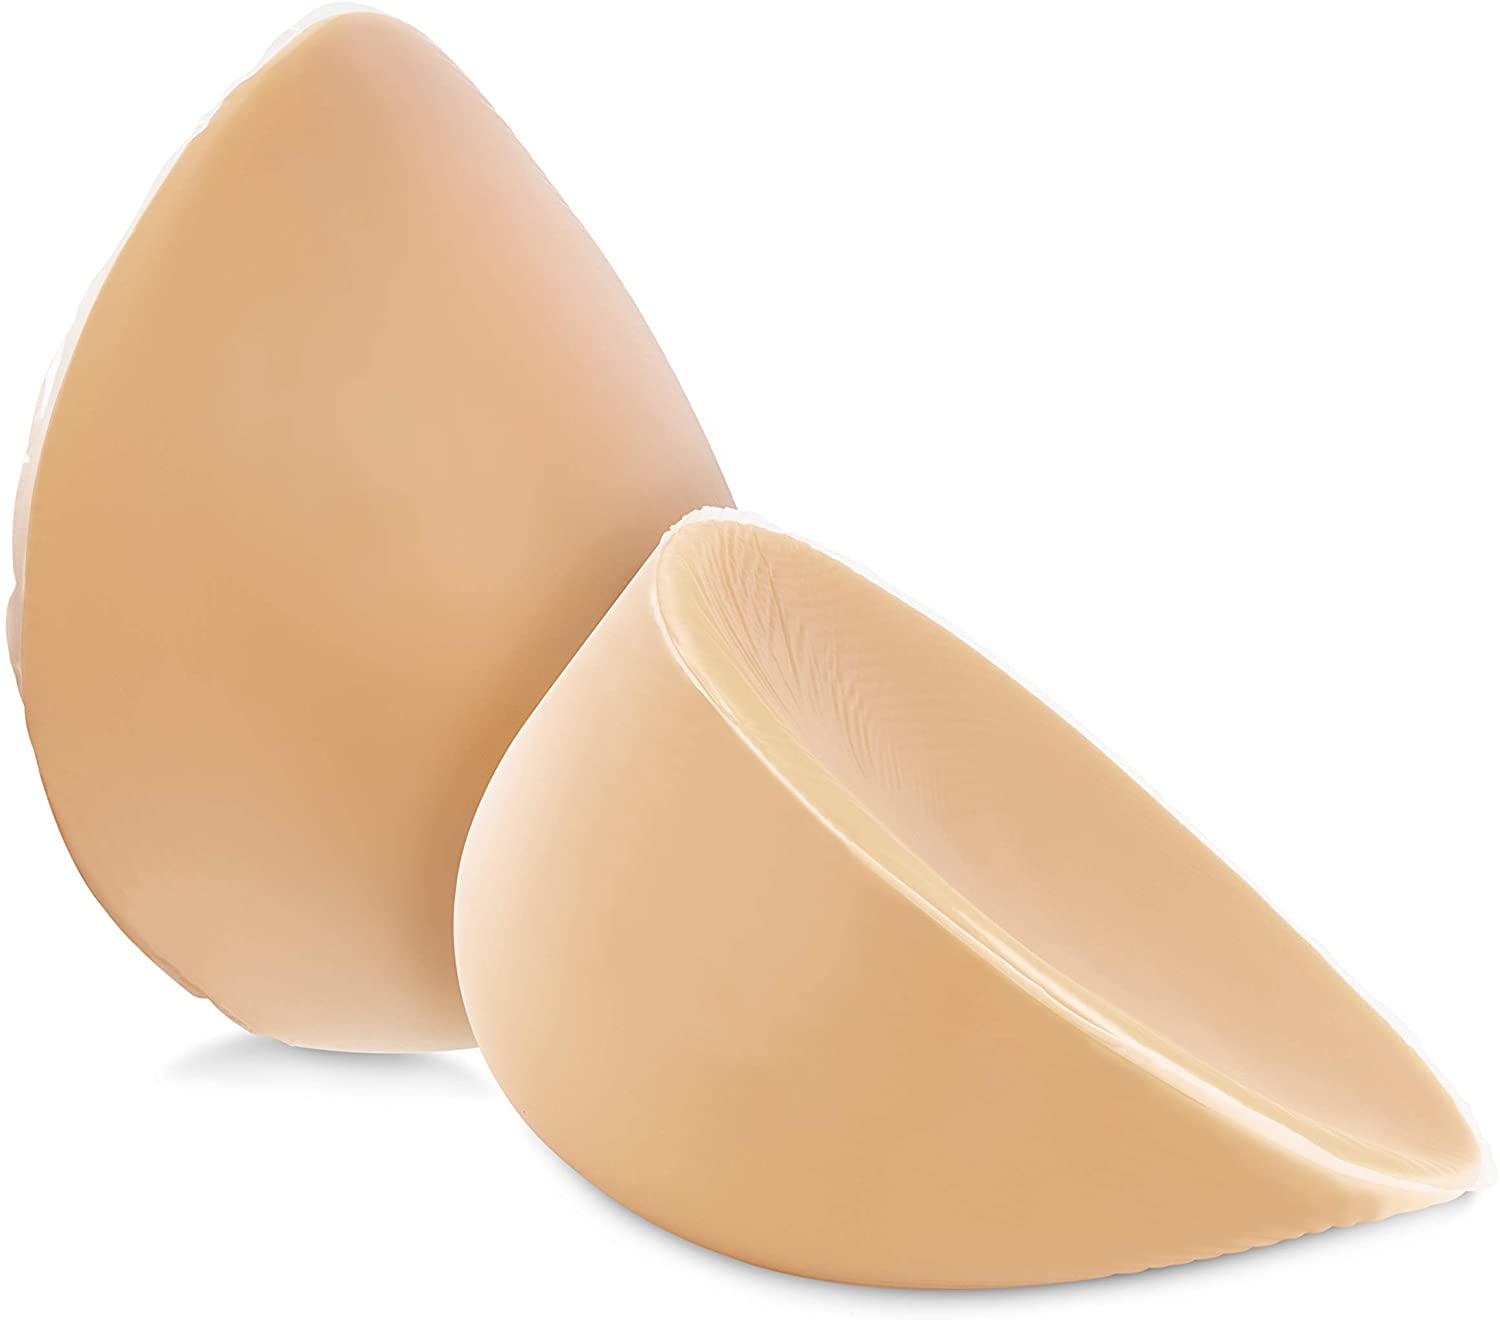 Feminique Silicone Breast Forms, Prosthetic Breast for Transgender,  Mastectomy